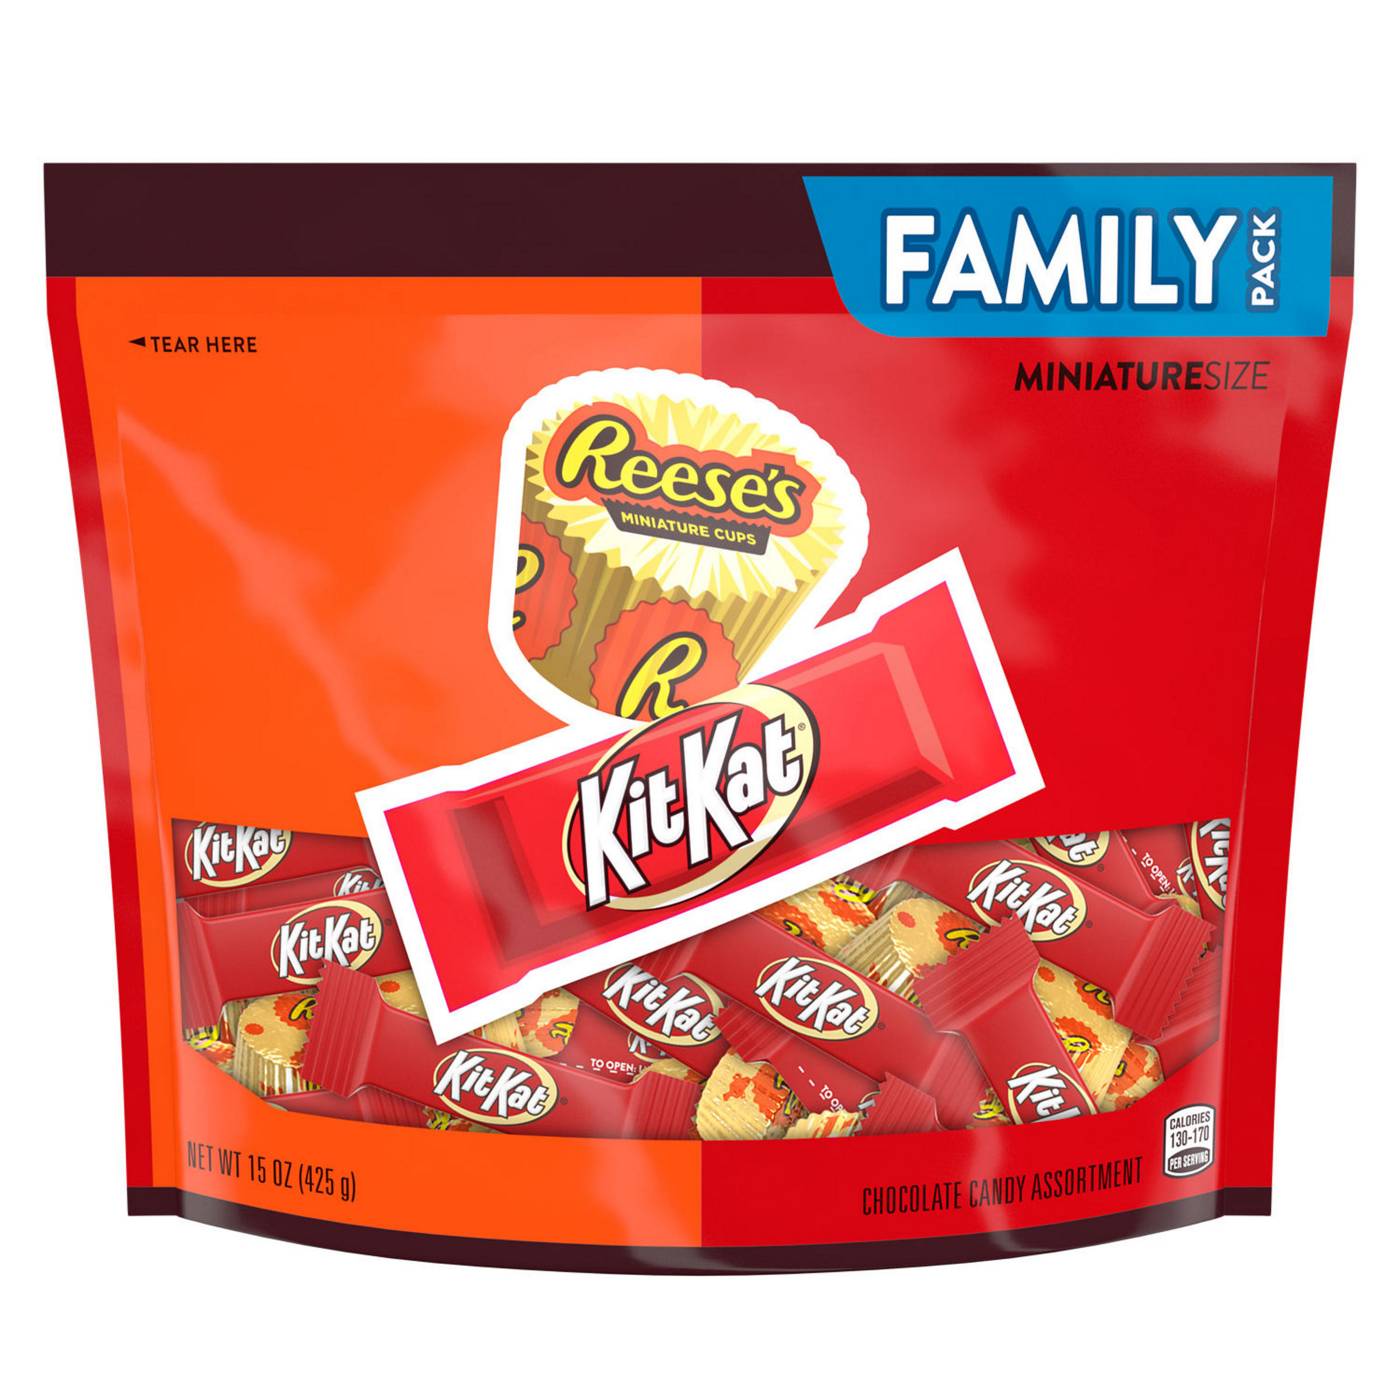 Hershey's Reese's & Kit Kat Miniature Size Chocolate, Family Pack; image 1 of 5